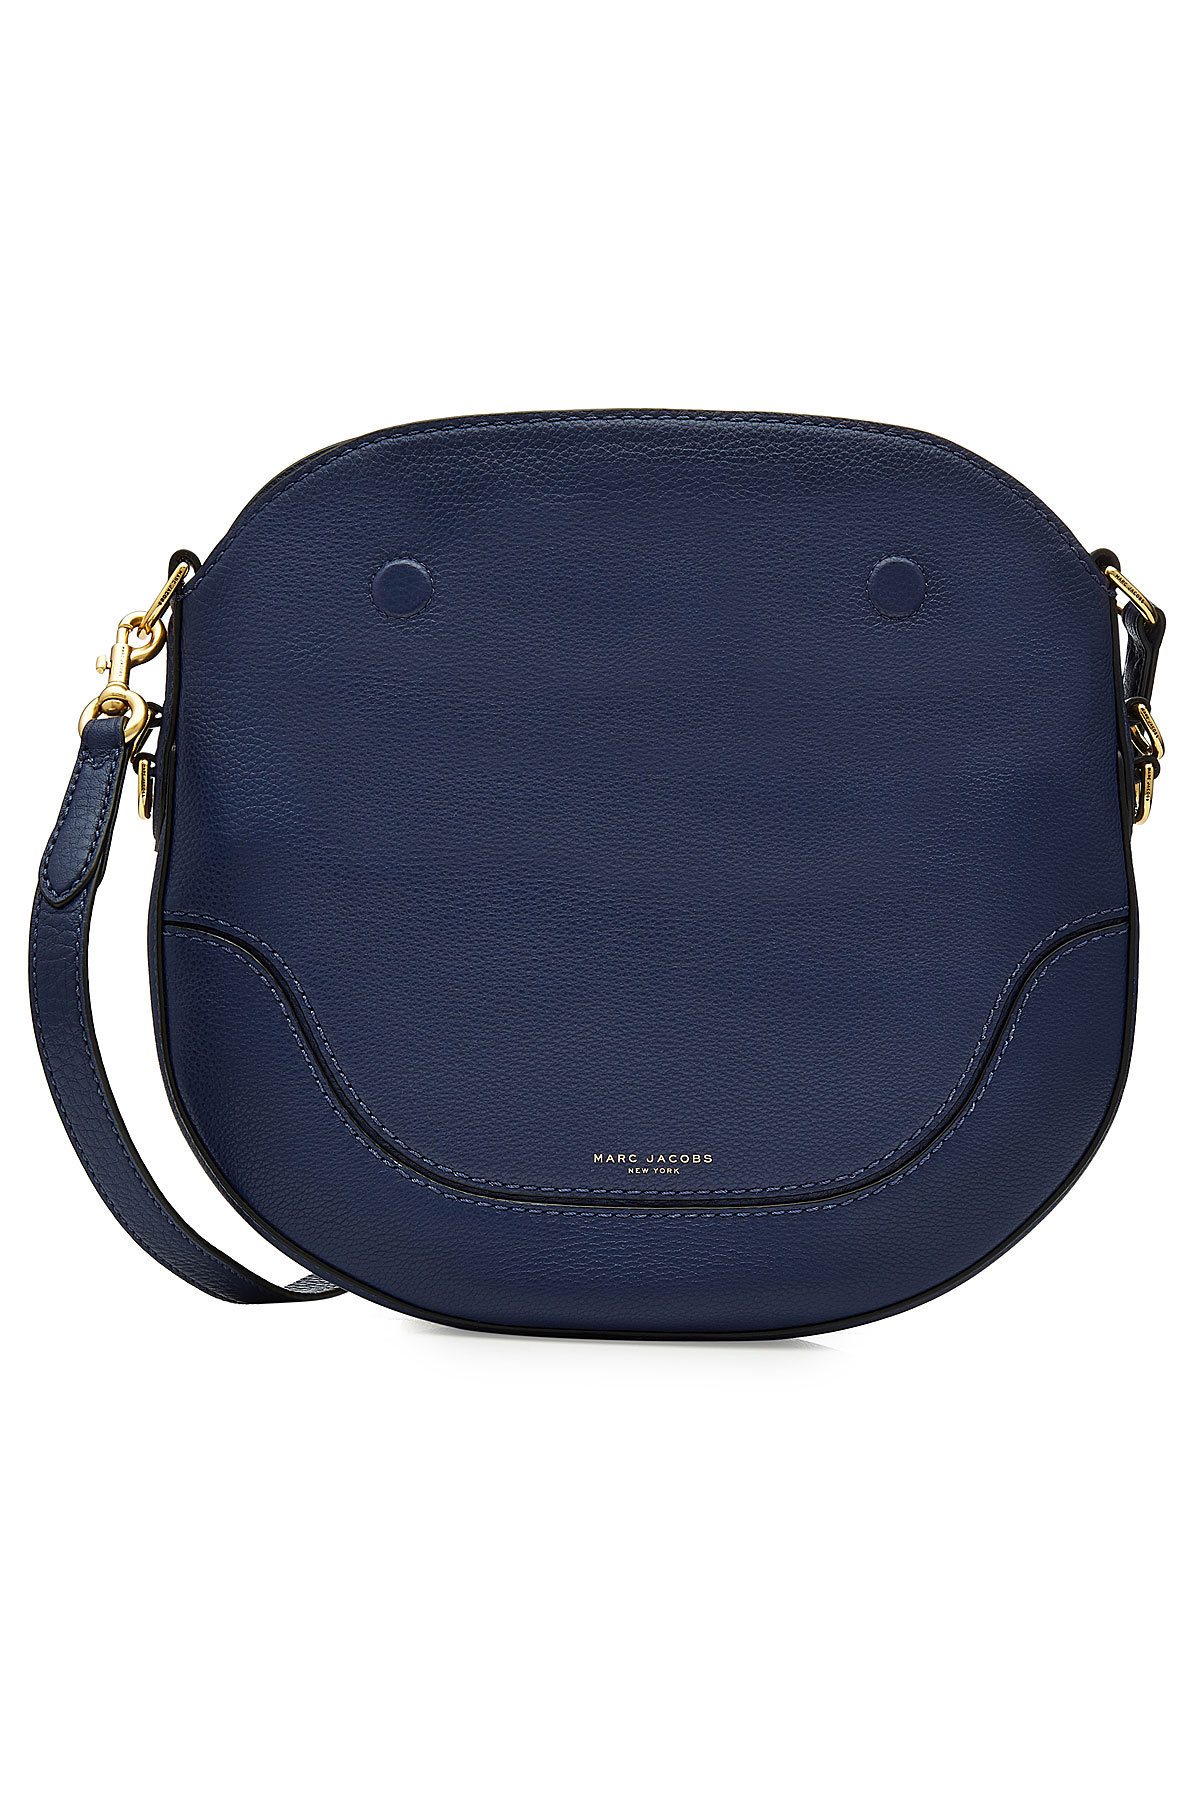 Marc Jacobs - The Small Drifter Leather Shoulder Bag